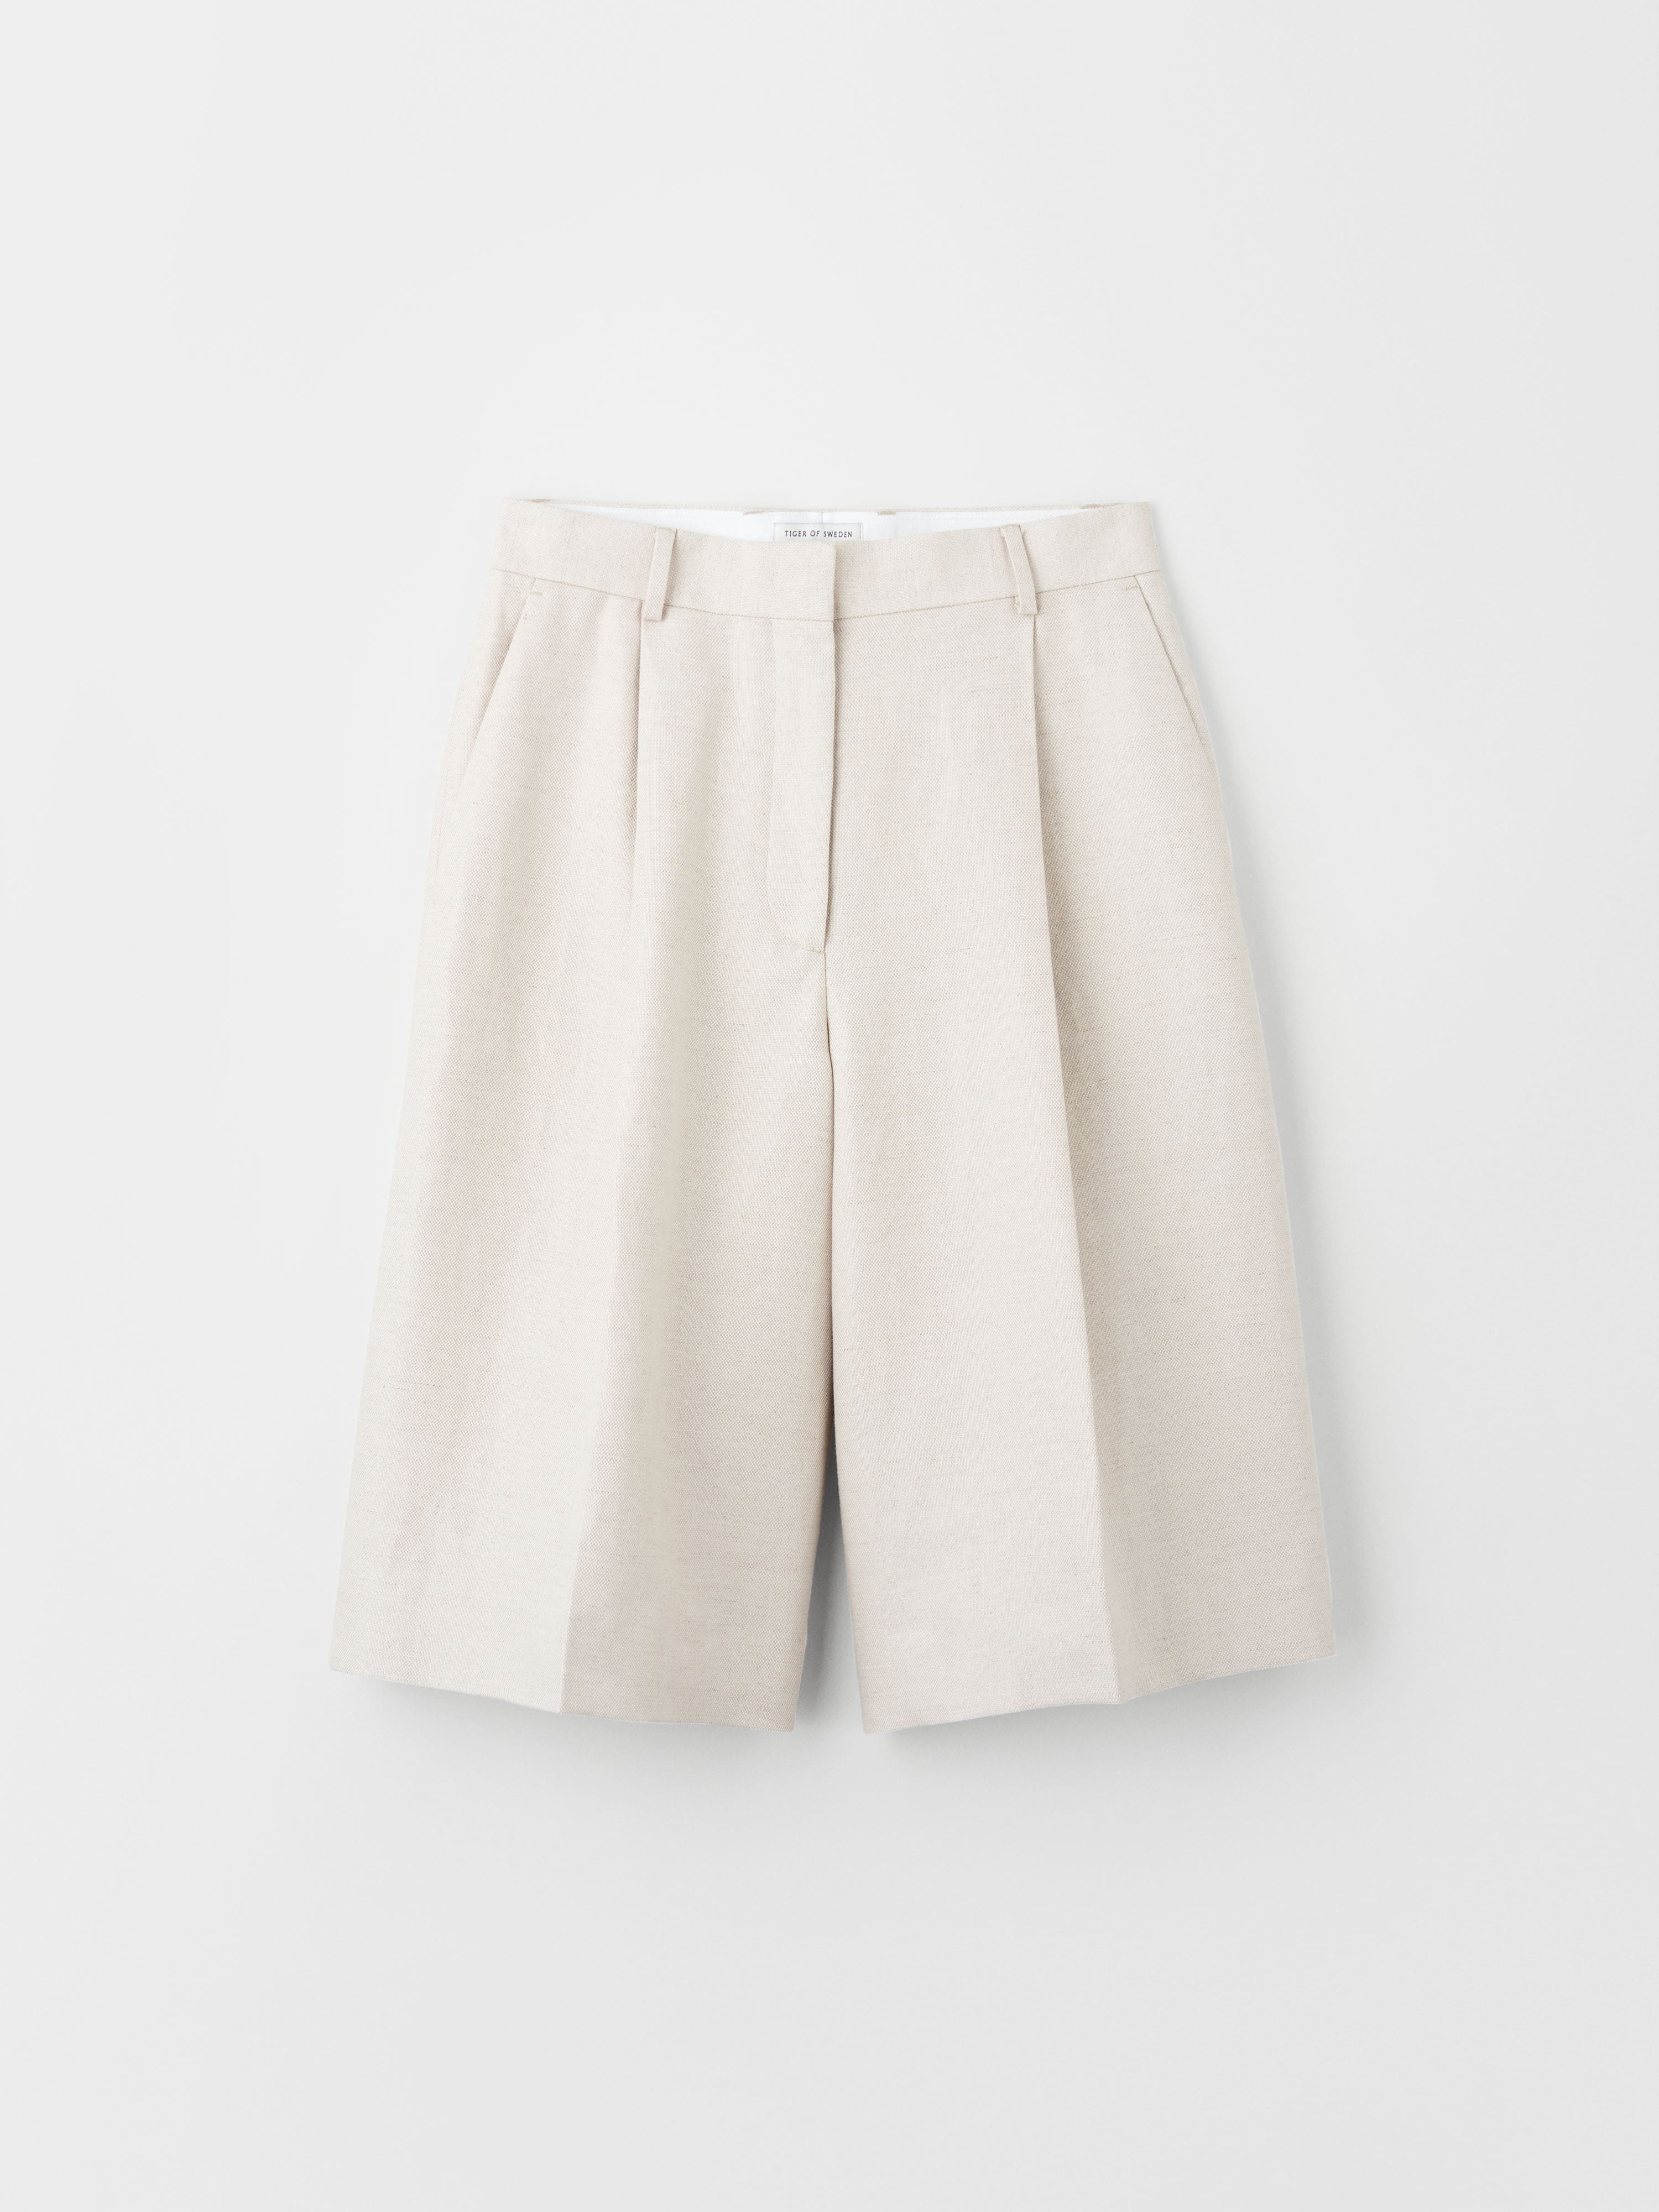 Tiger of Sweden Admiira Shorts in Light Beige s71595003 - FROM EIGHTYWINGOLD - OFFICIAL BRAND PARTNER